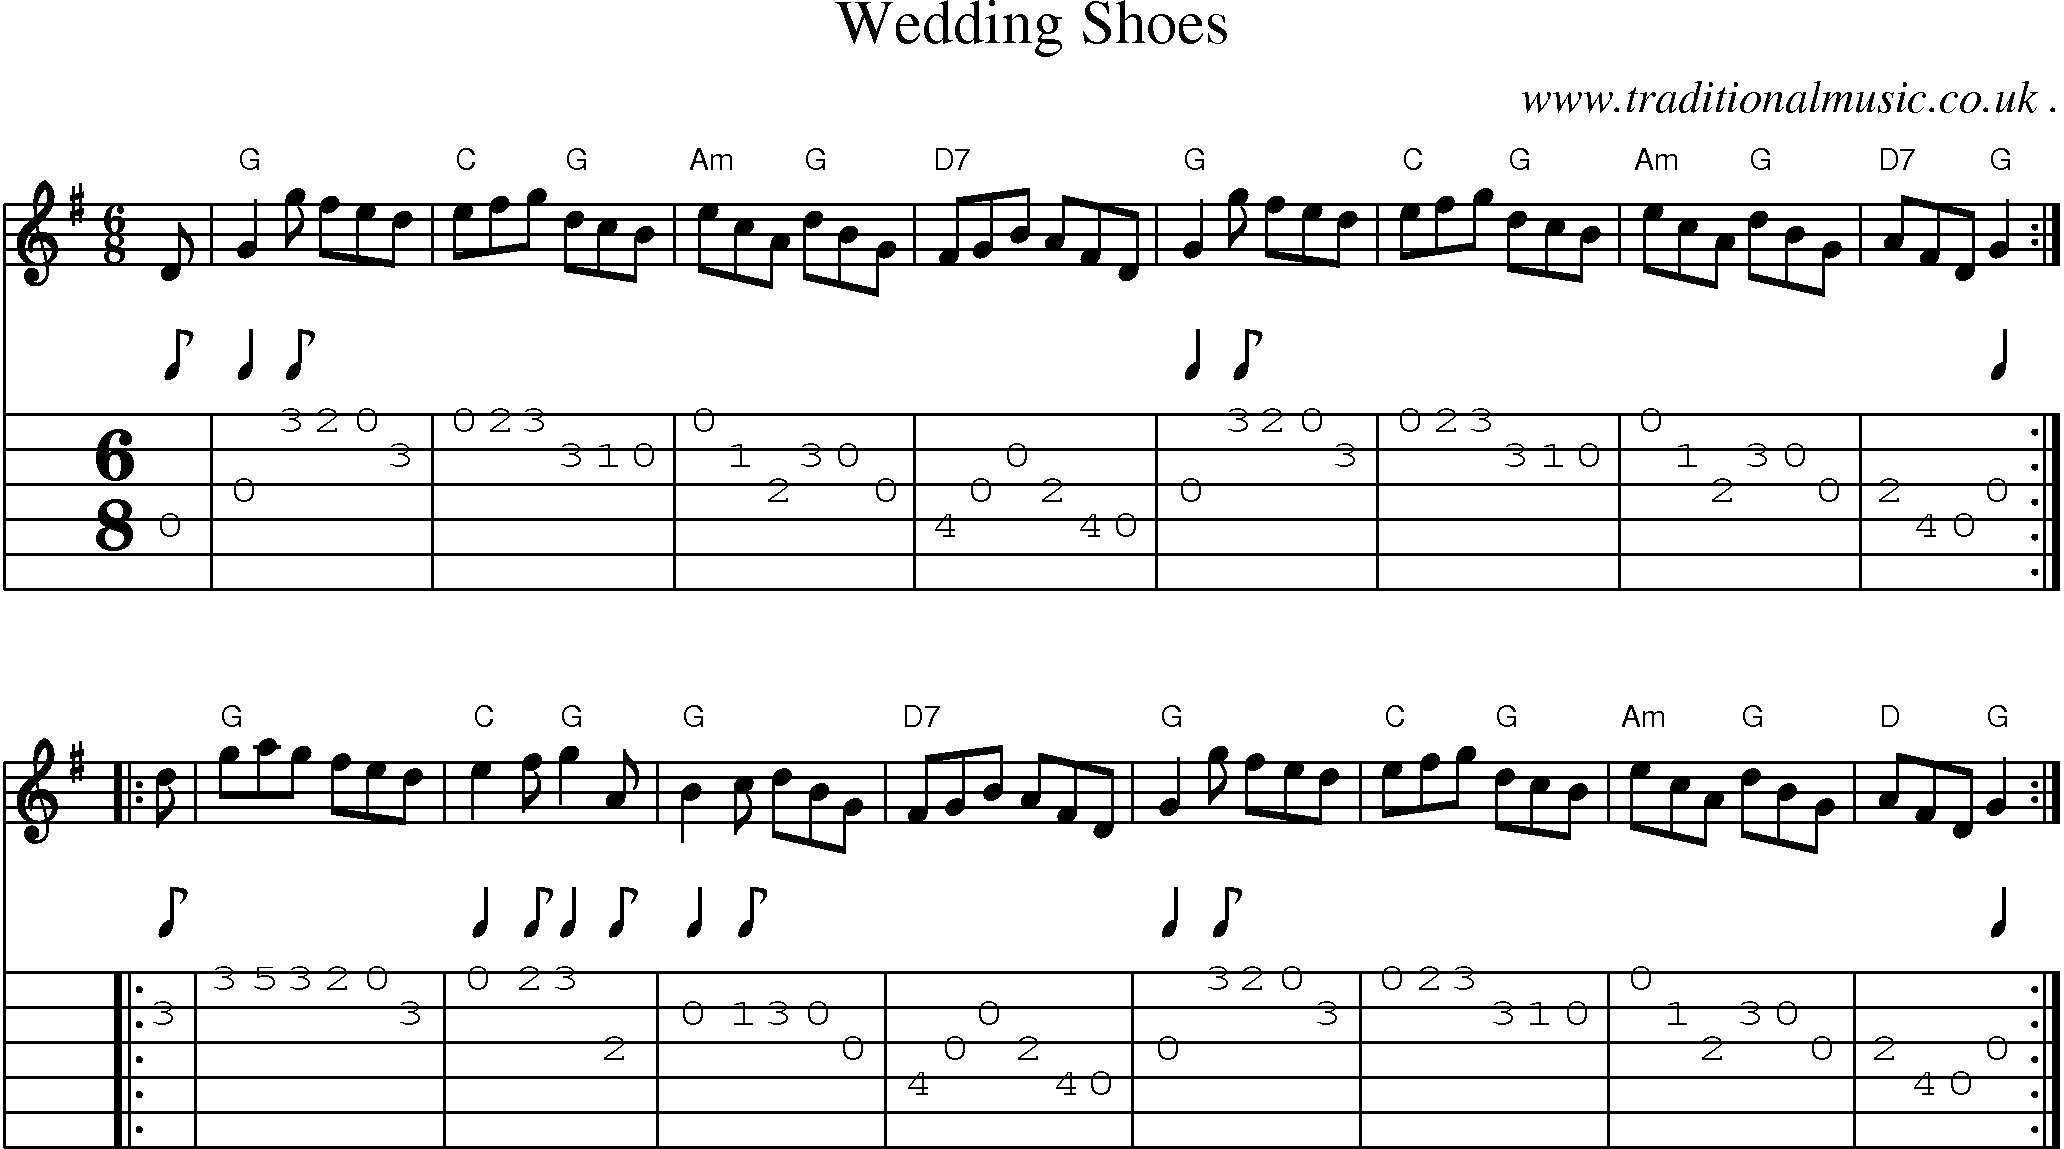 Sheet-music  score, Chords and Guitar Tabs for Wedding Shoes